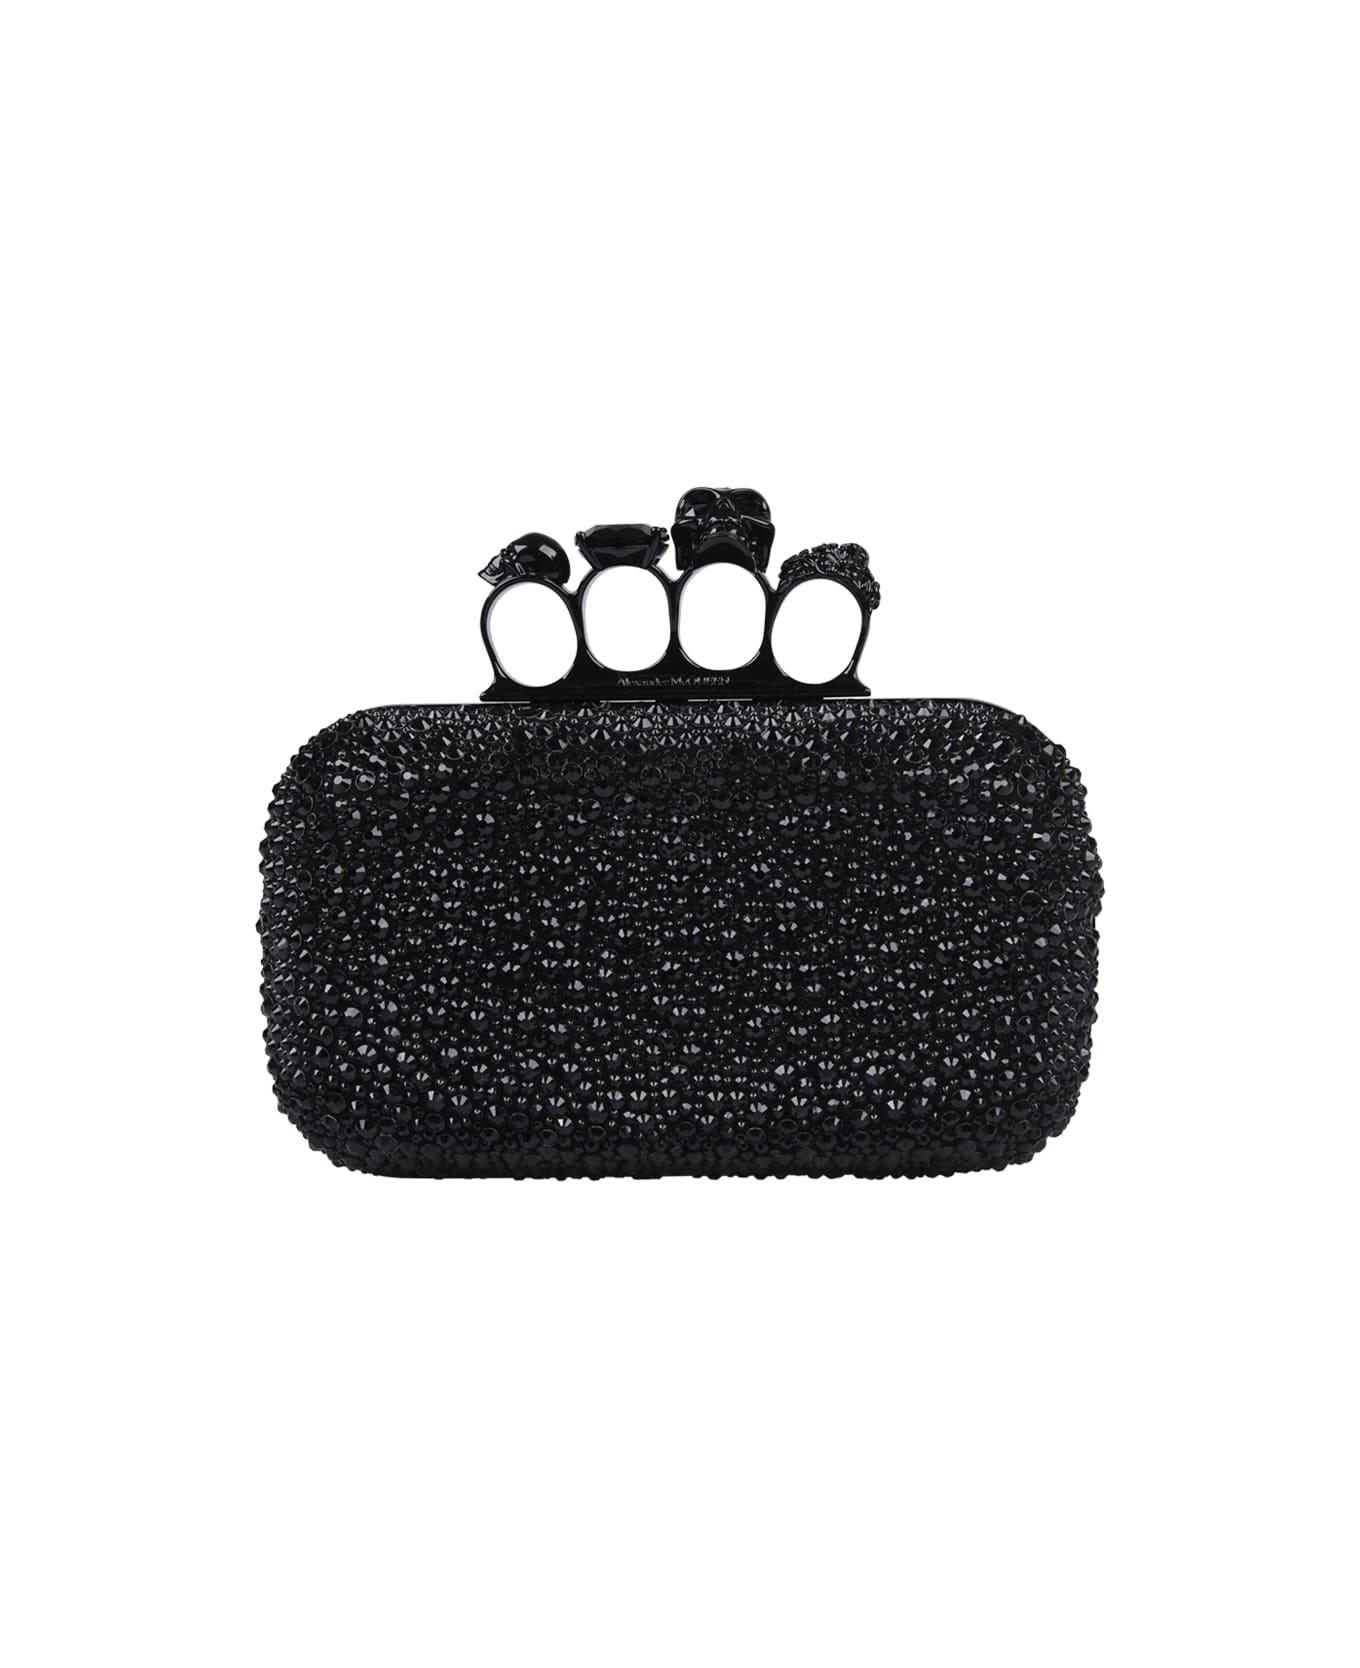 Alexander McQueen Black Skull Four Ring Clutch Bag With Chain - Nero